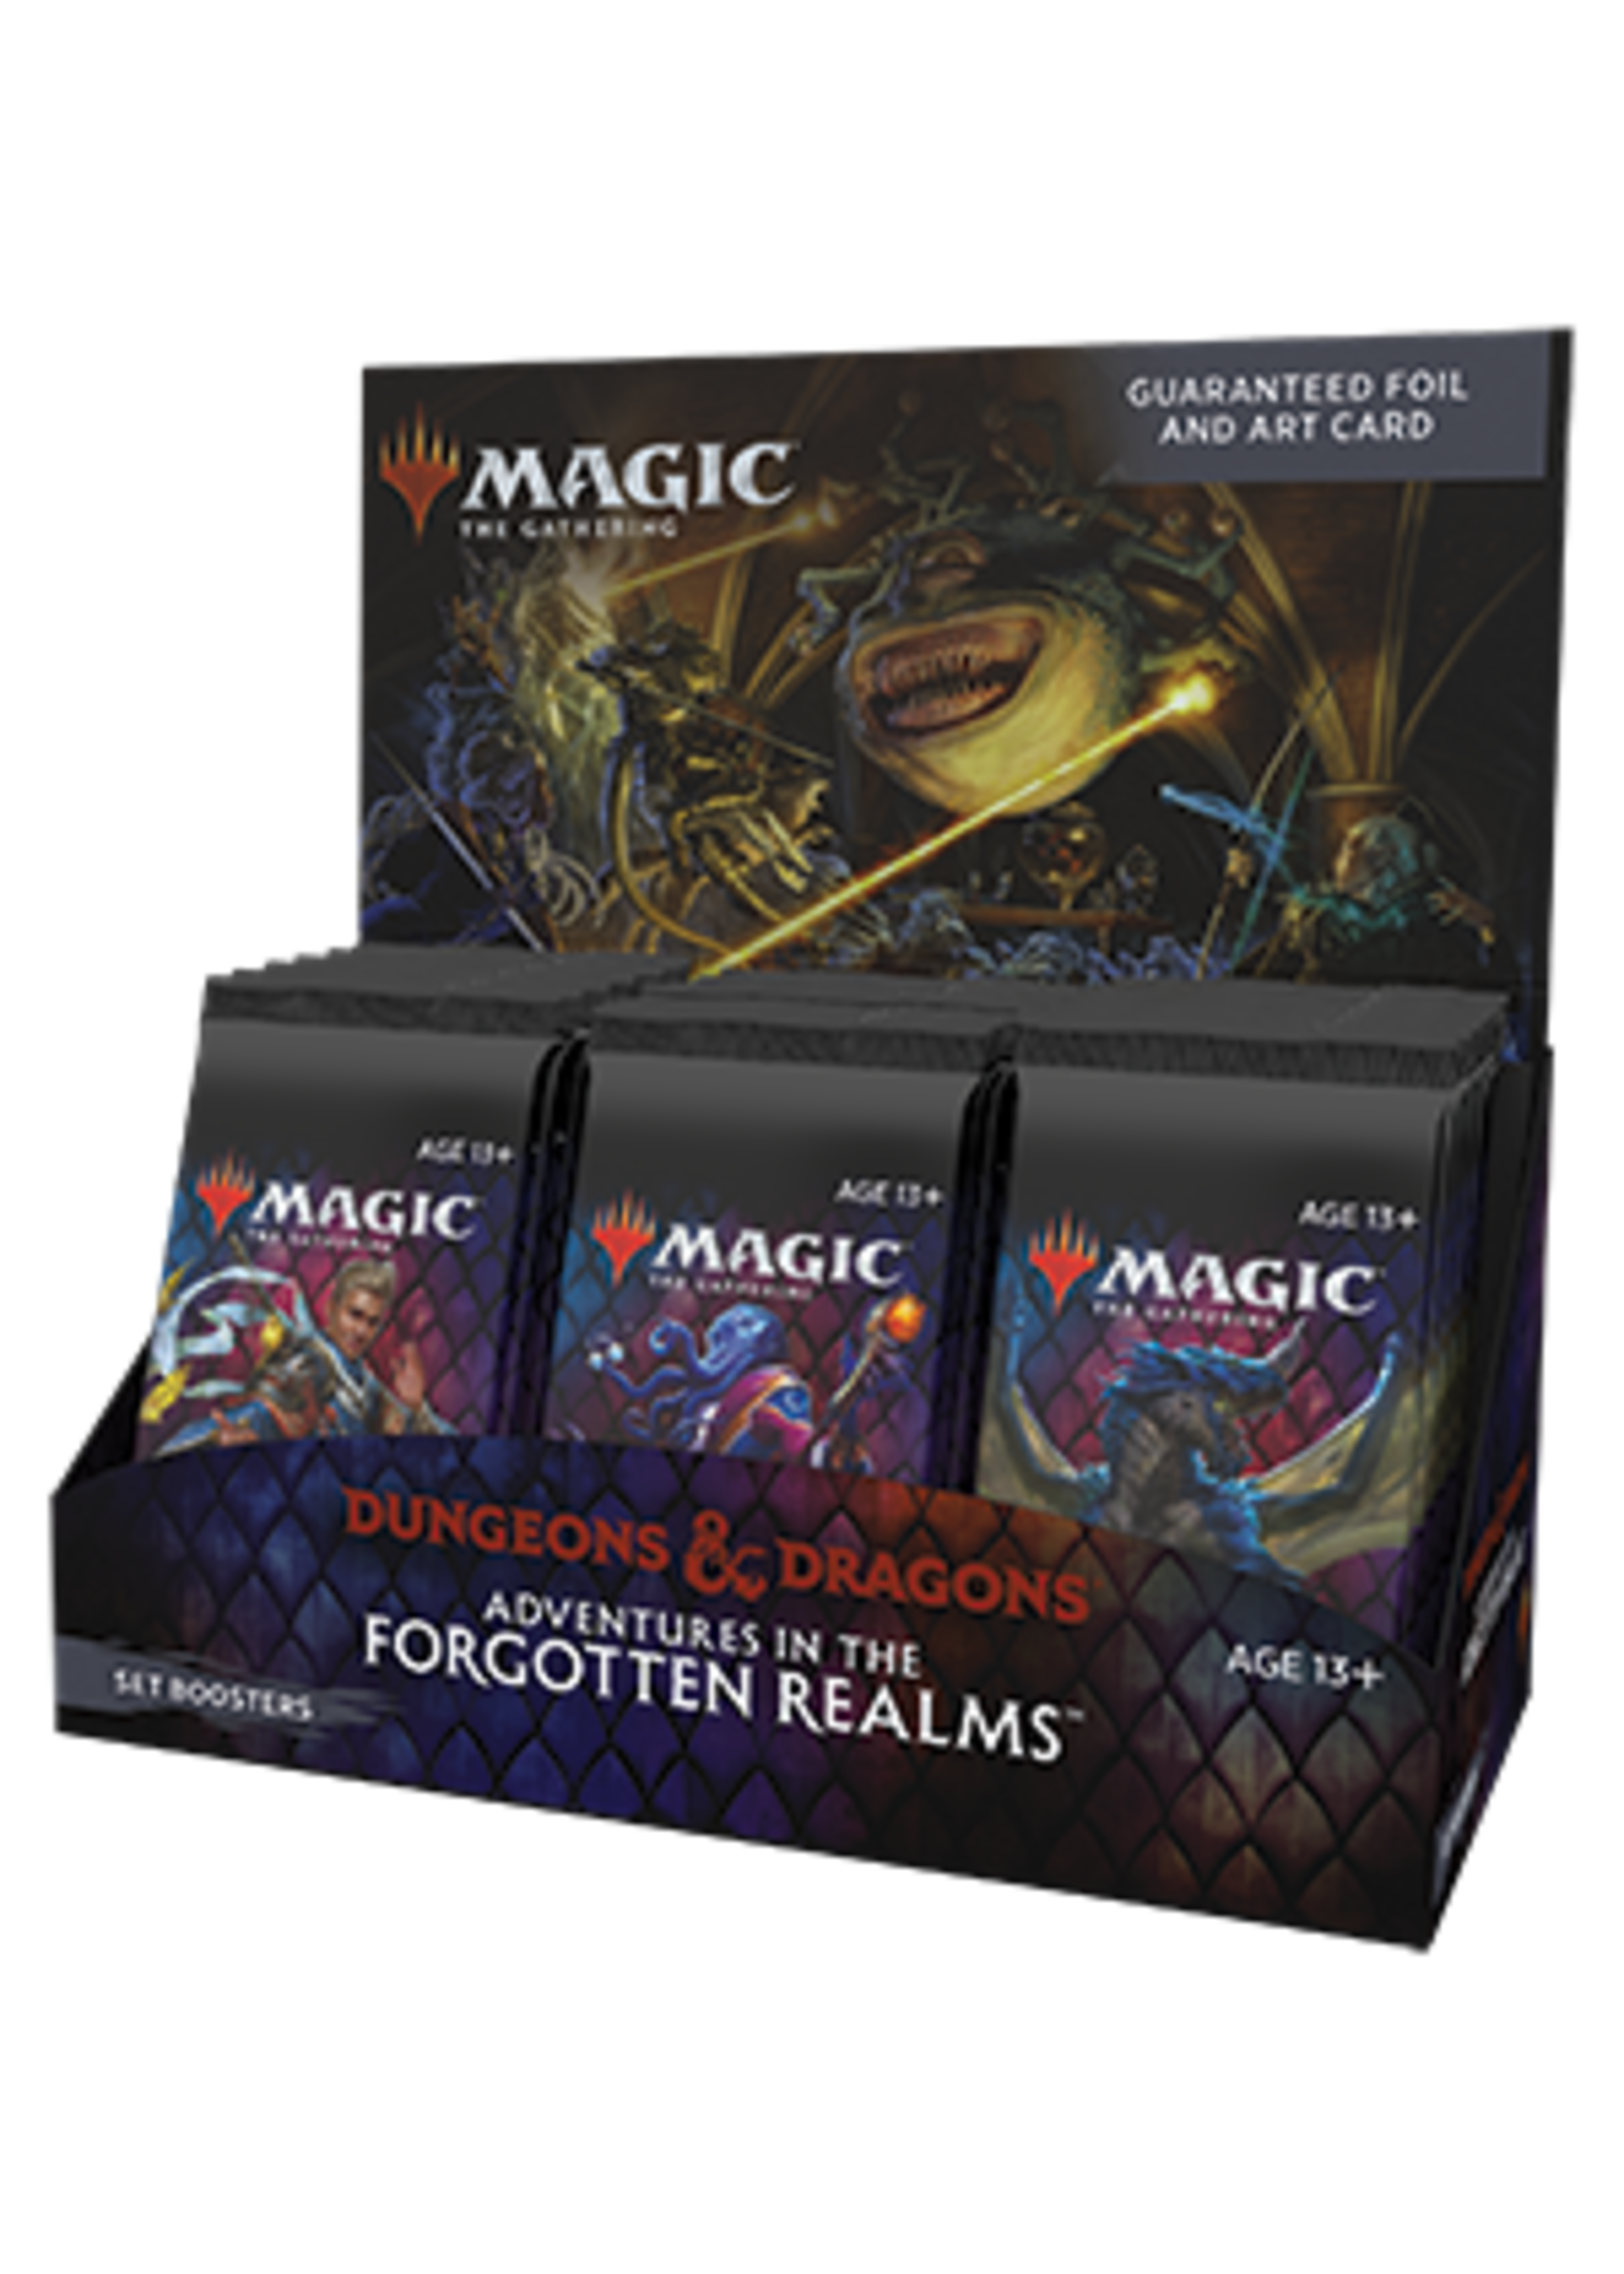 Wizards of the Coast Adventures in the Forgotten Realms Set Booster Box